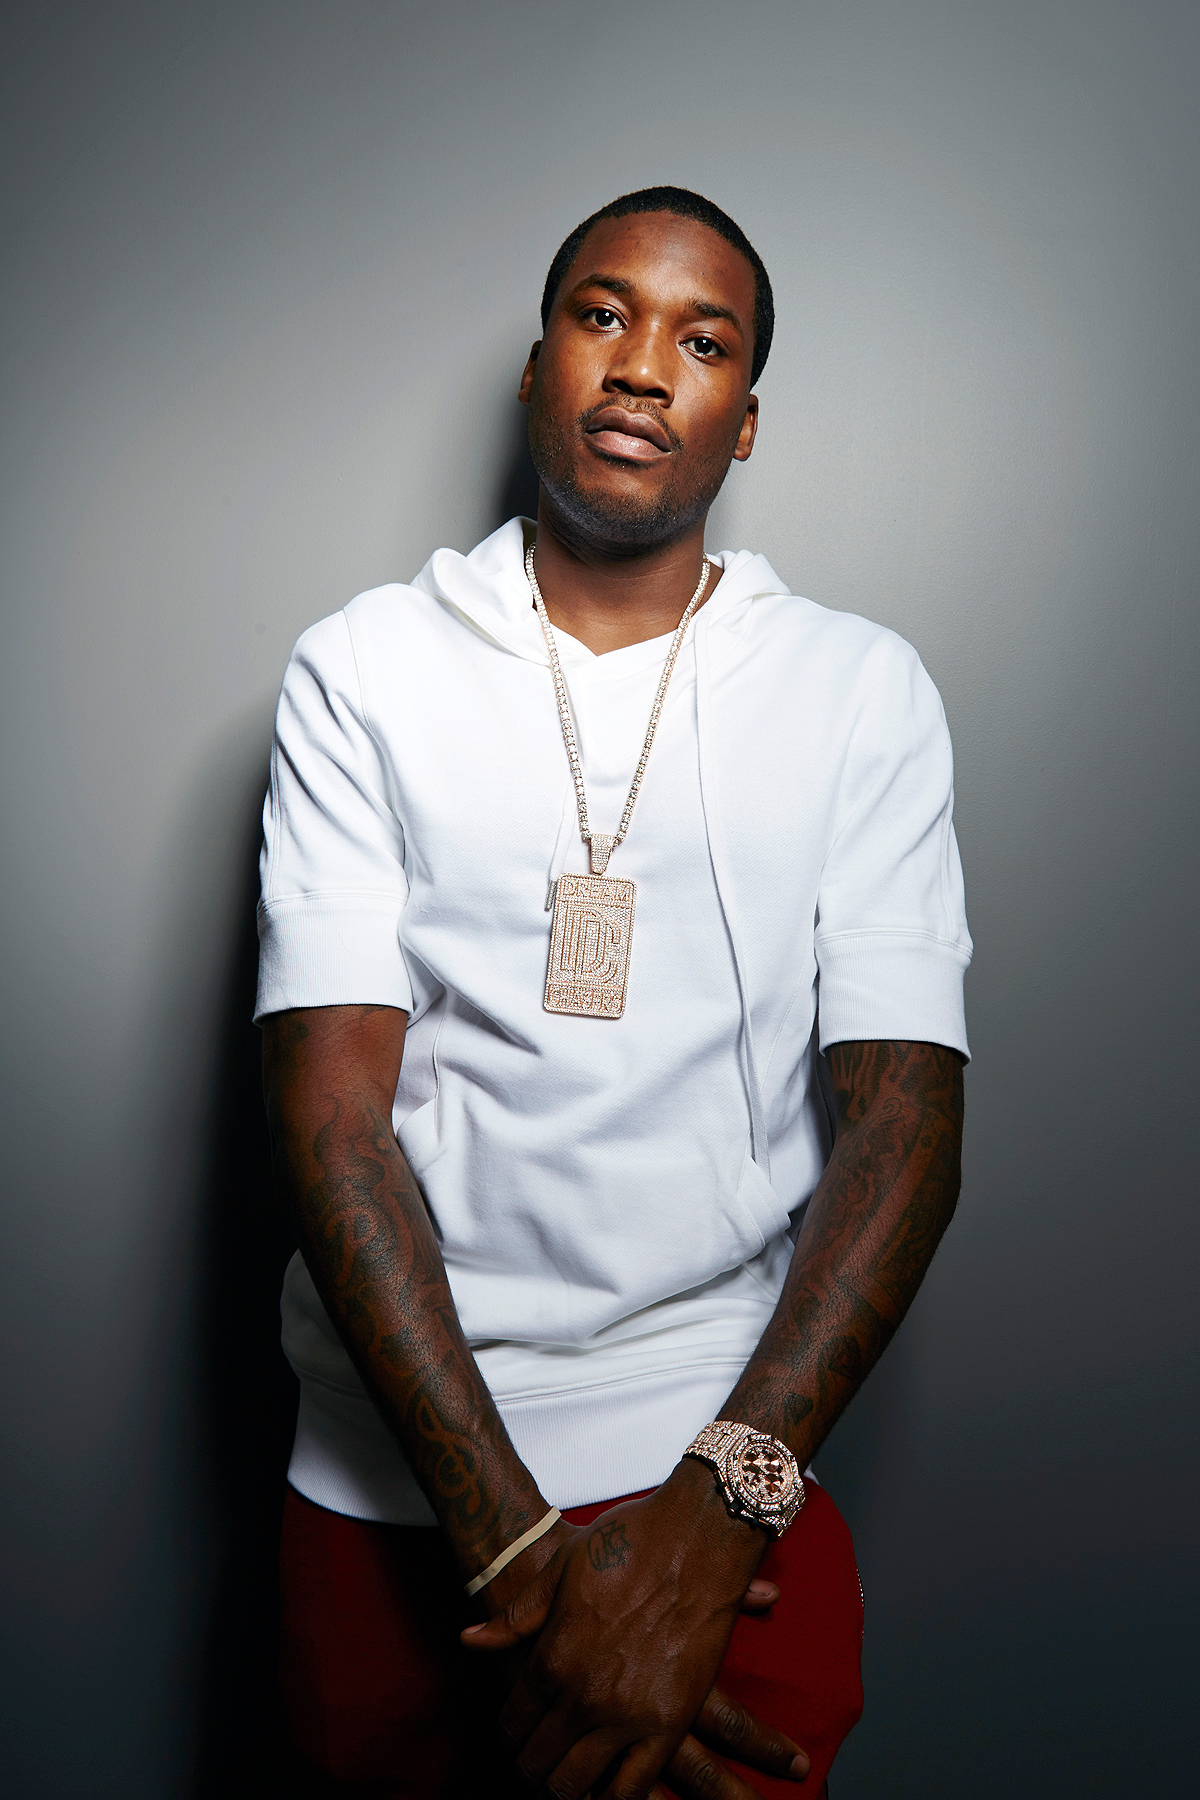 How Much is Meek Mill net worth? Know About his Career and Awards